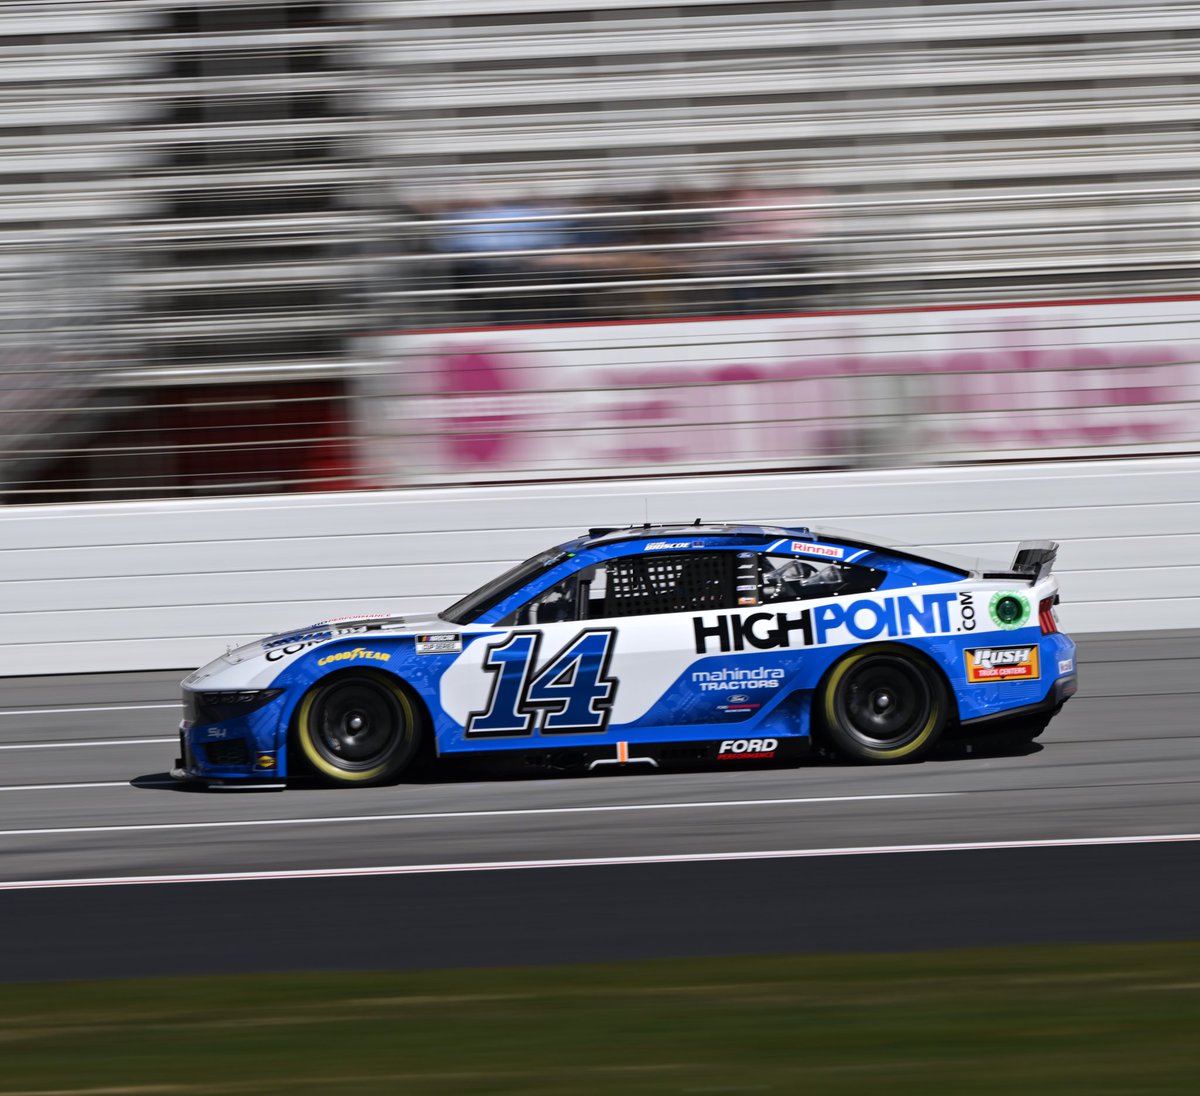 Round 2 of qualifying in @HighPoint blue.